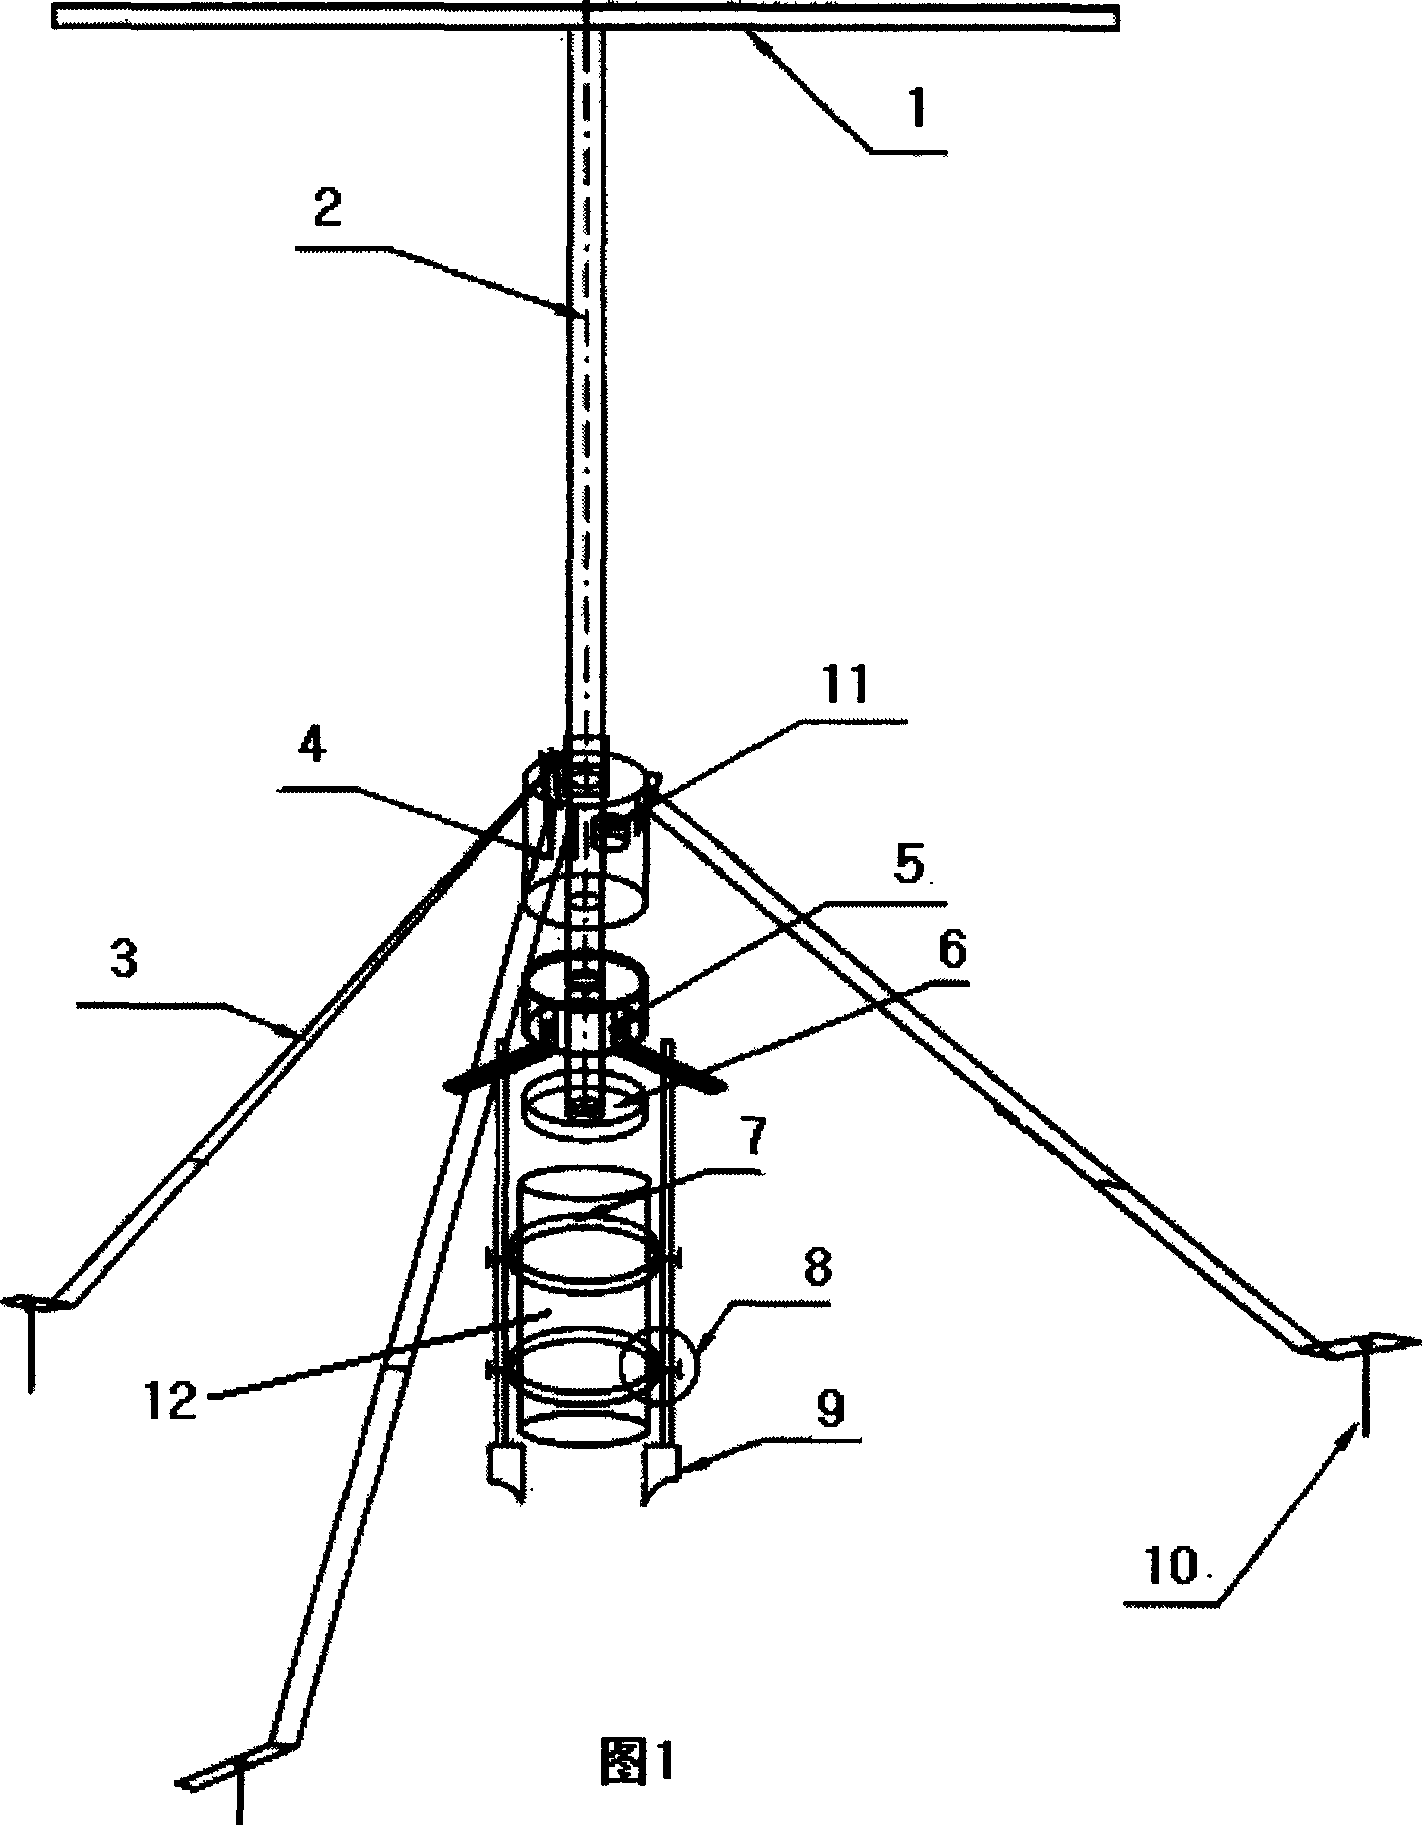 Support rotating undisturbed soil sampling device